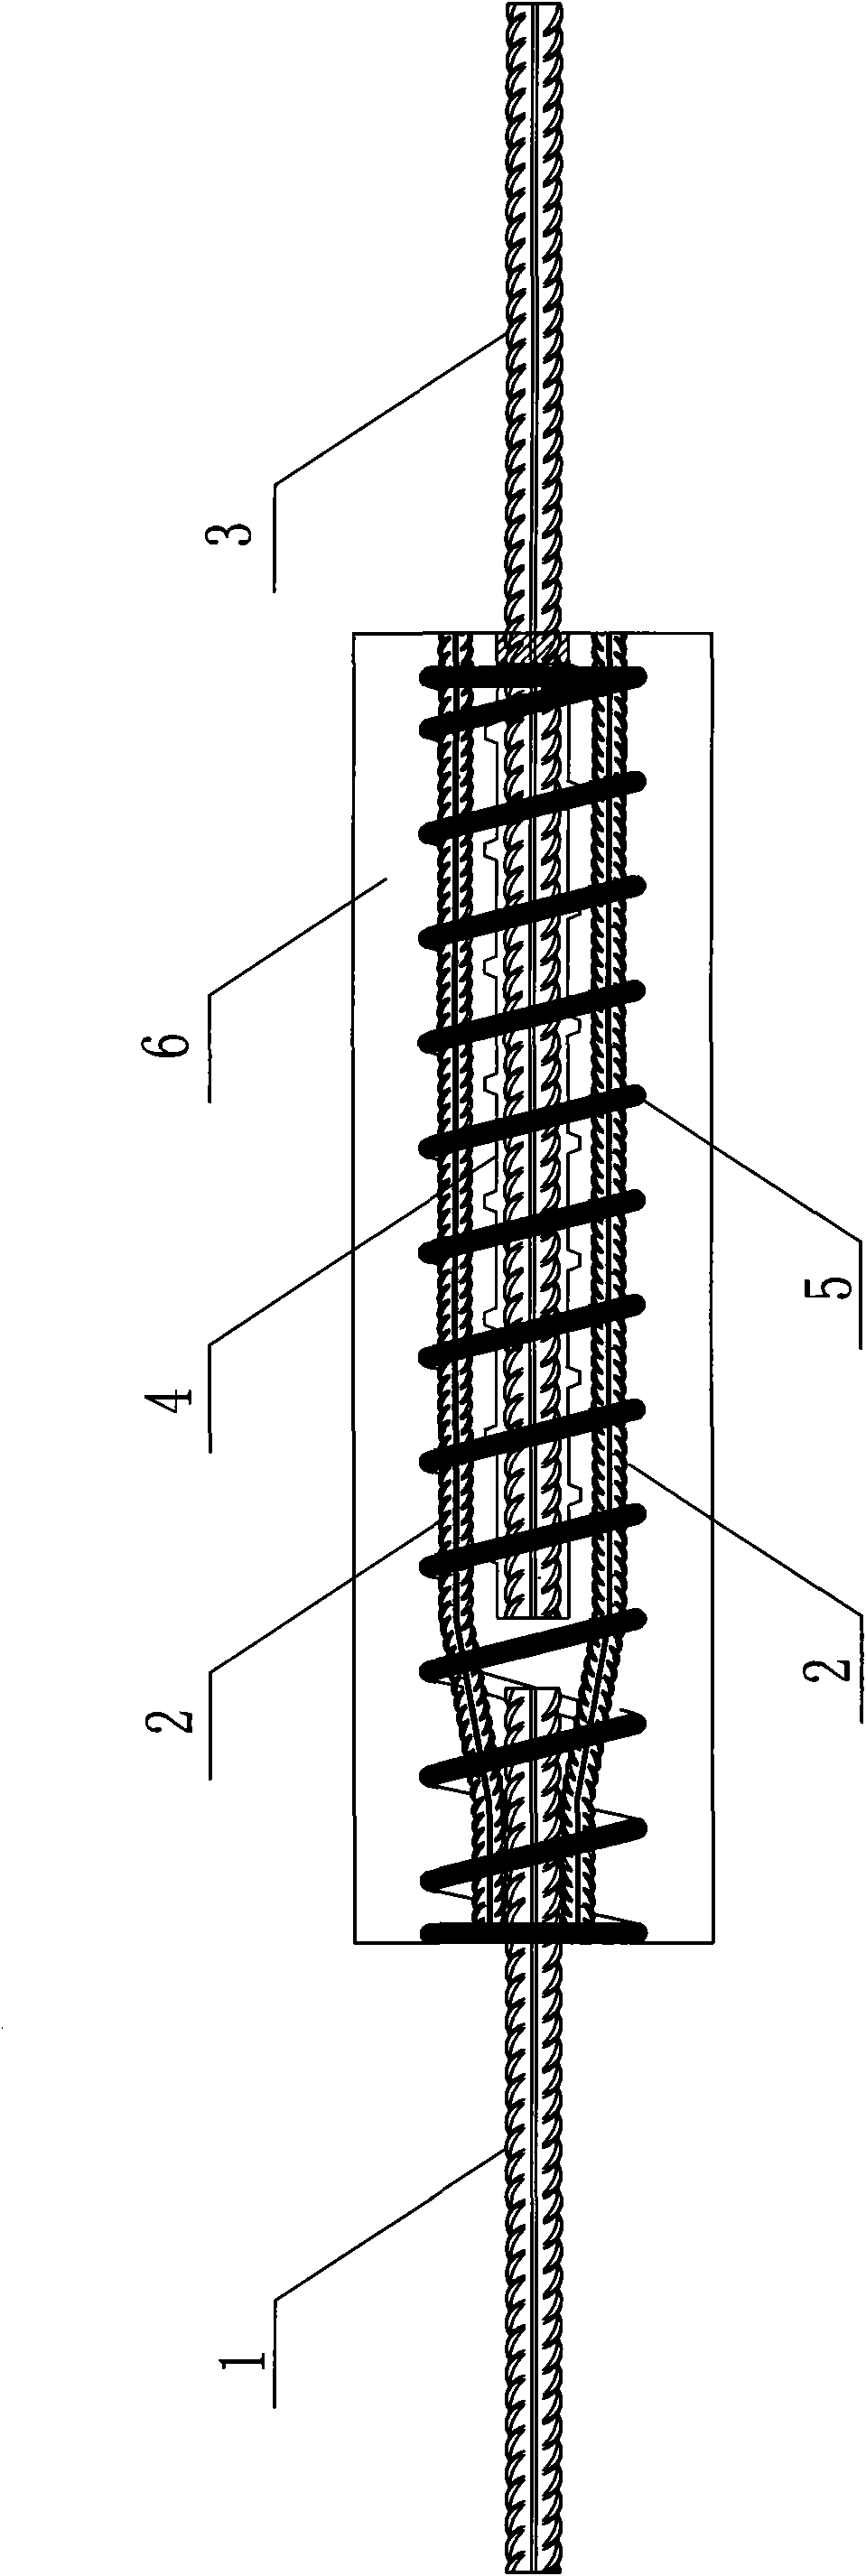 Bifurcate lap connection of reinforcing steel bars and connection method thereof